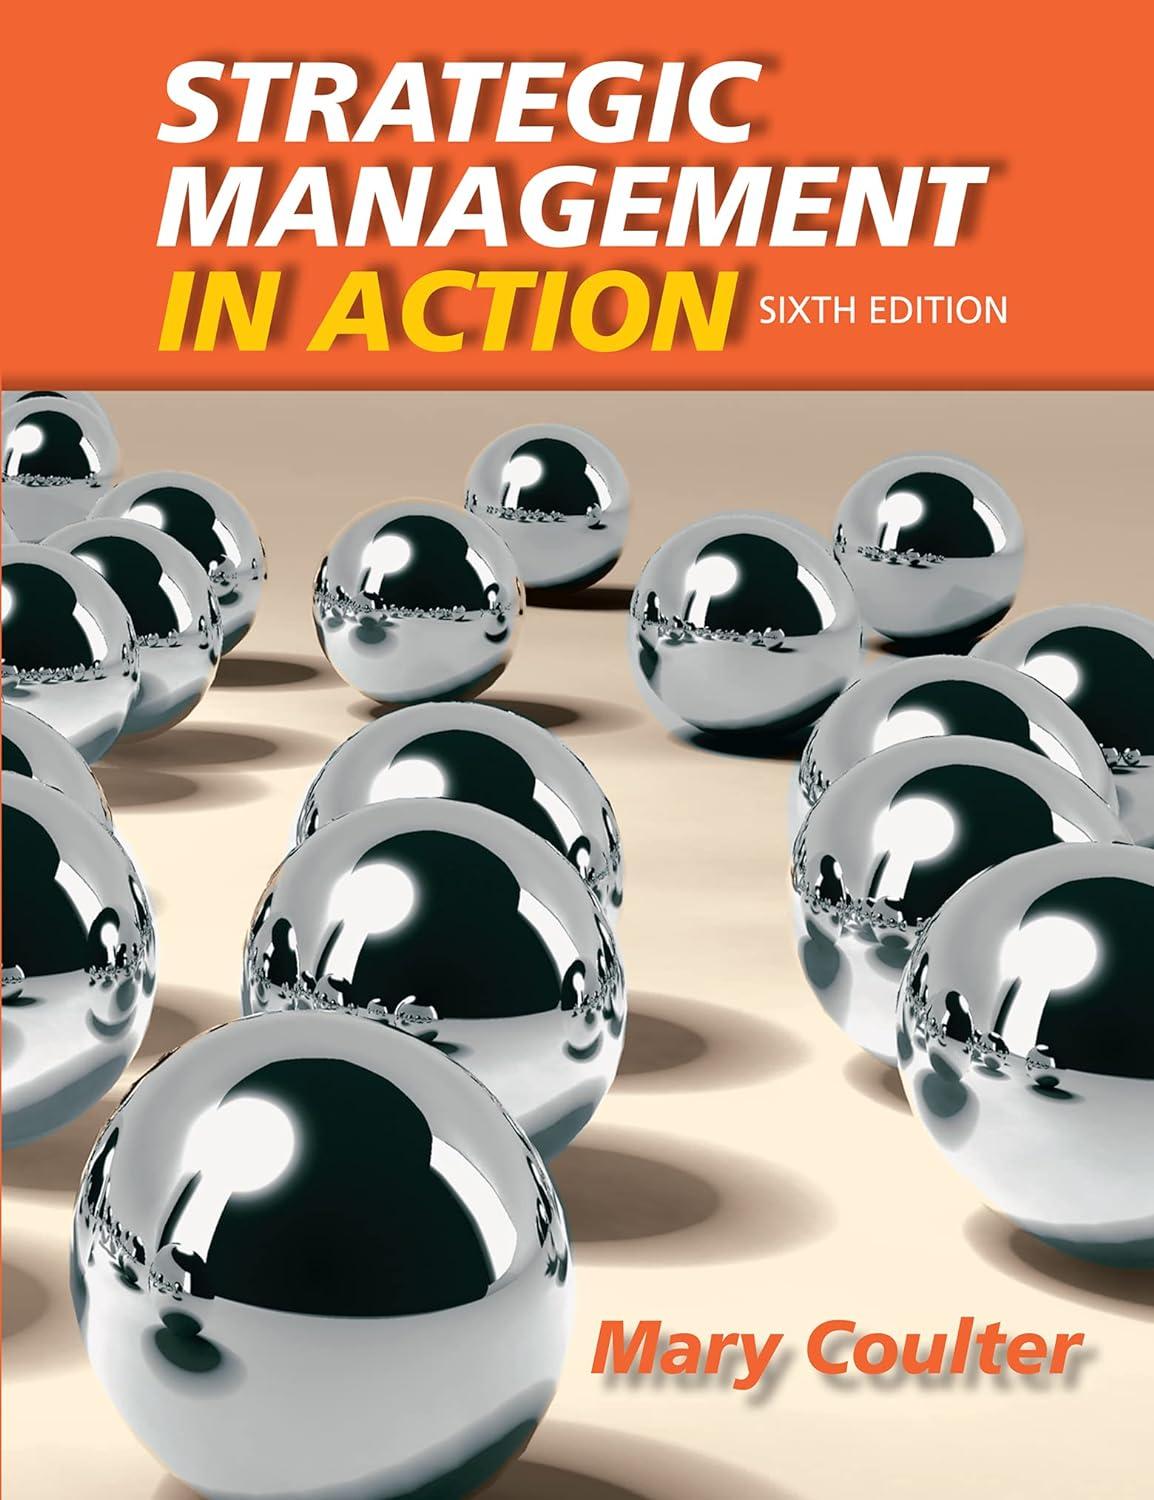 strategic management in action 6th edition mary a. coulter 0132620677, 978-0132620673